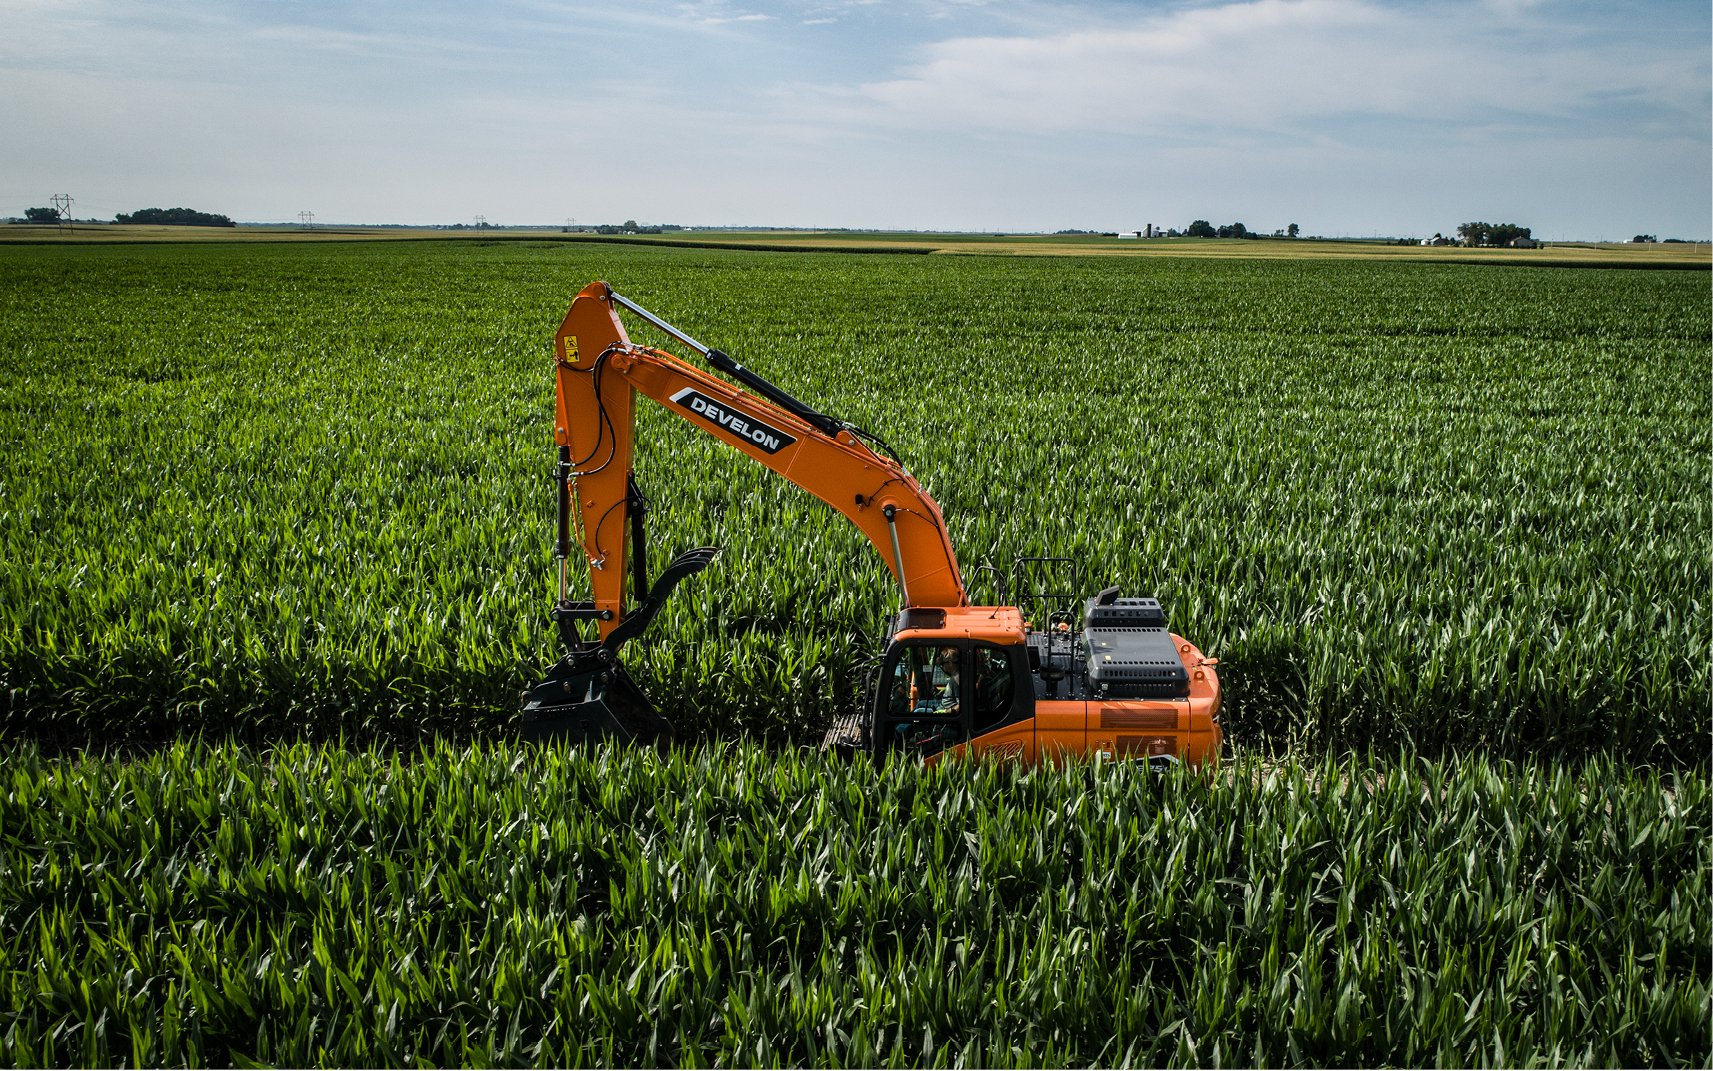 A drone image of a DEVELON excavator moving through a cornfield.